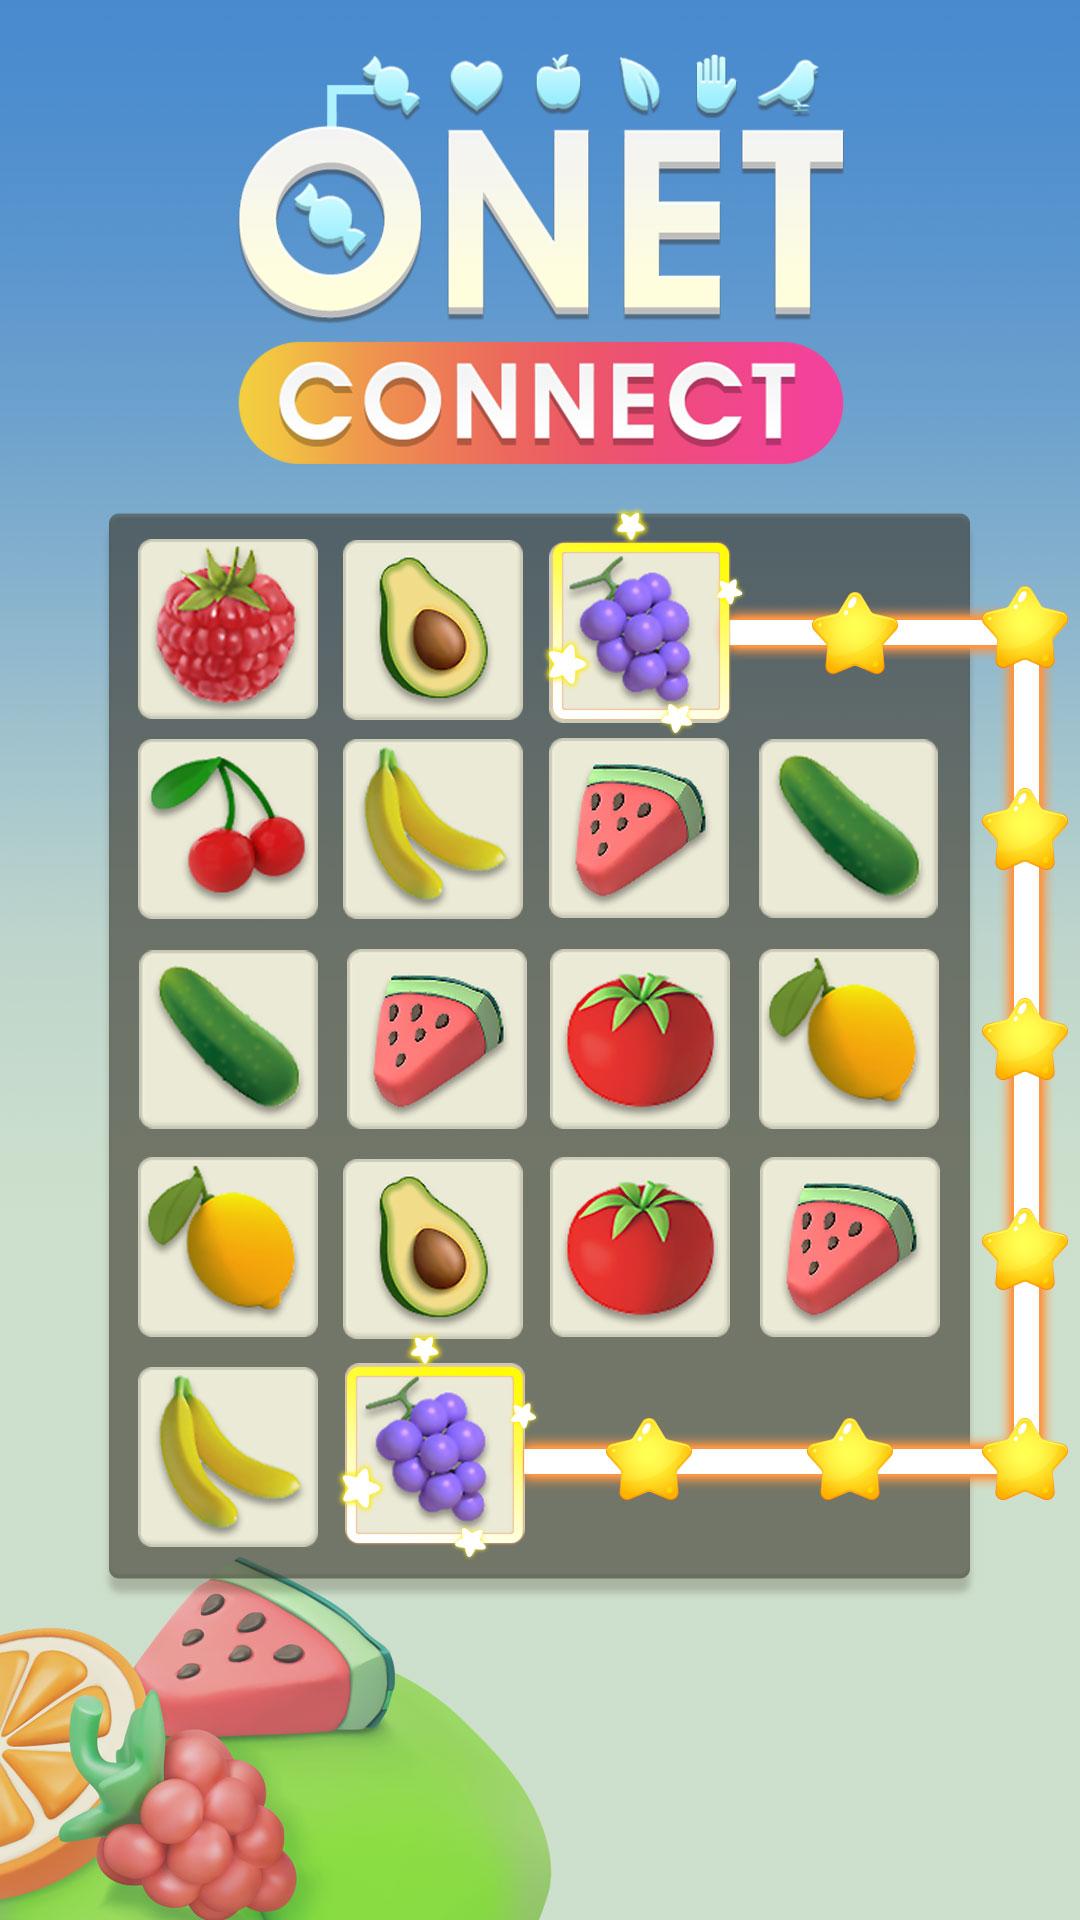 Onet Connect Free Tile Match Puzzle Game 1.1.0 Screenshot 1